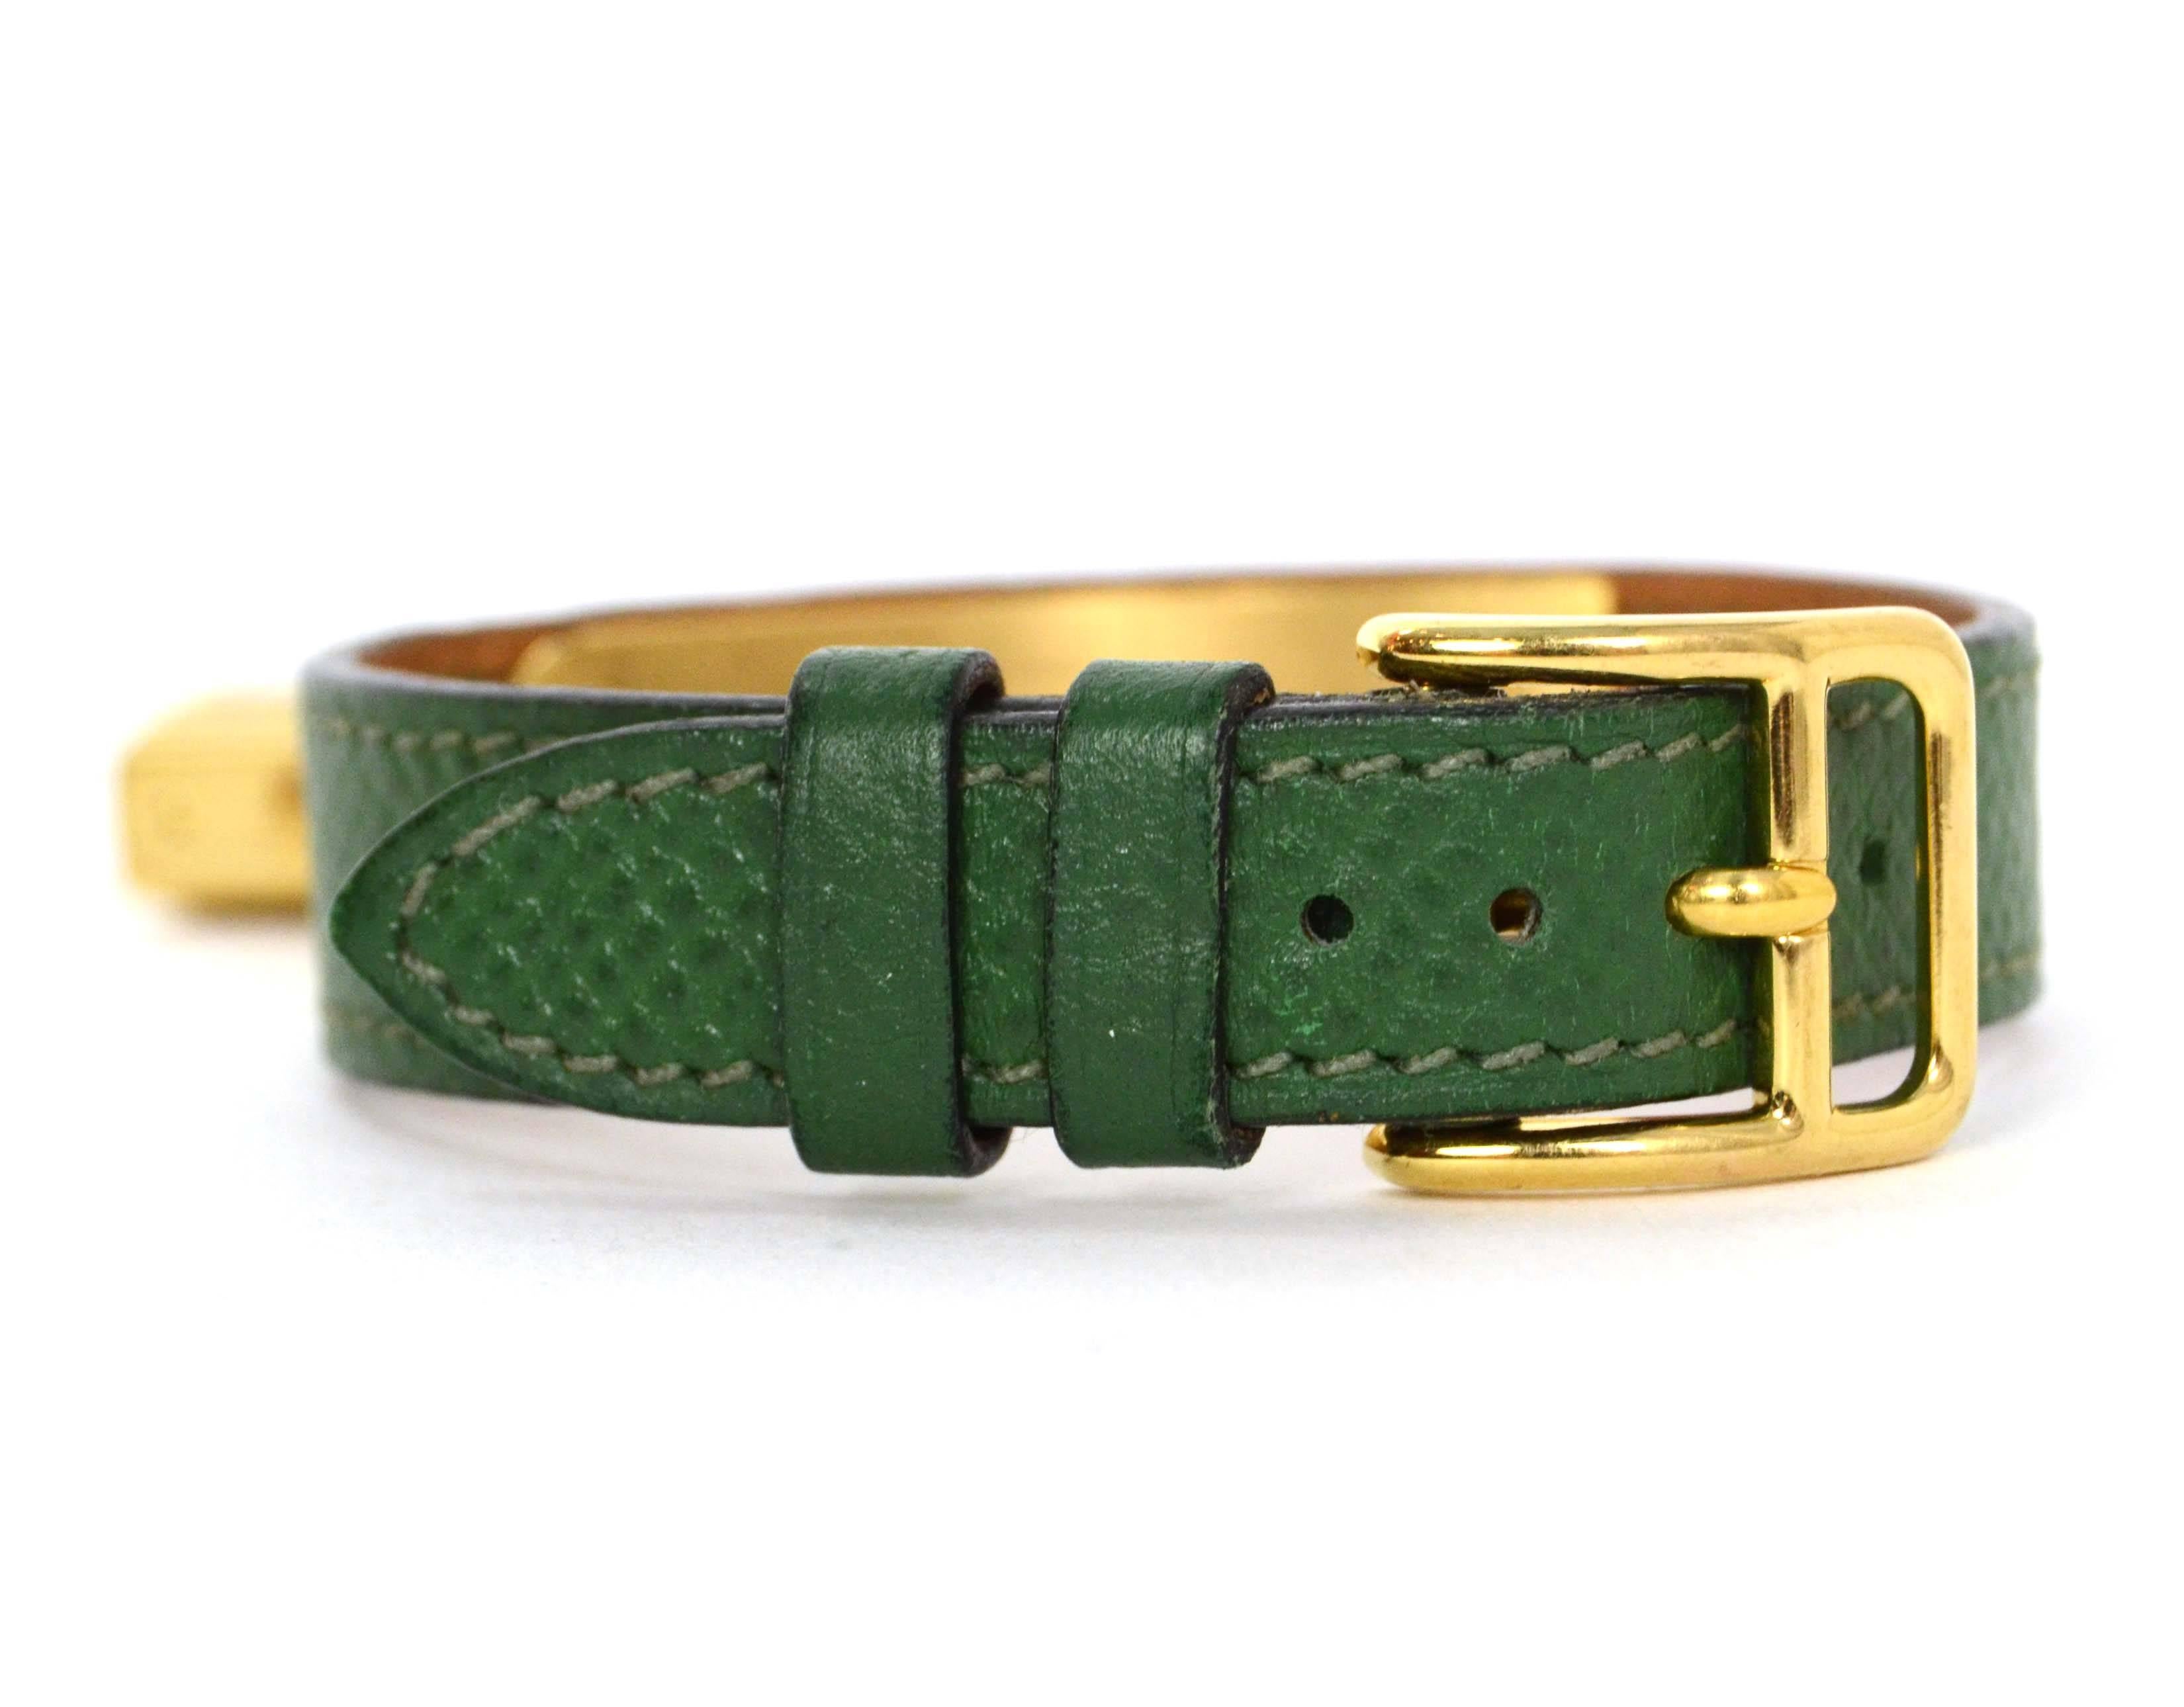 Hermes Vintage '94 Green Epsom Goldtone Kelly Watch 

Made In: Switzerland
Year of Production: 1994
Color: Green and goldtone
Materials: Epsom leather and godltone gold
Closure: Buckle and notch closure
Stamp: Face- 362715, Band- X stamp in